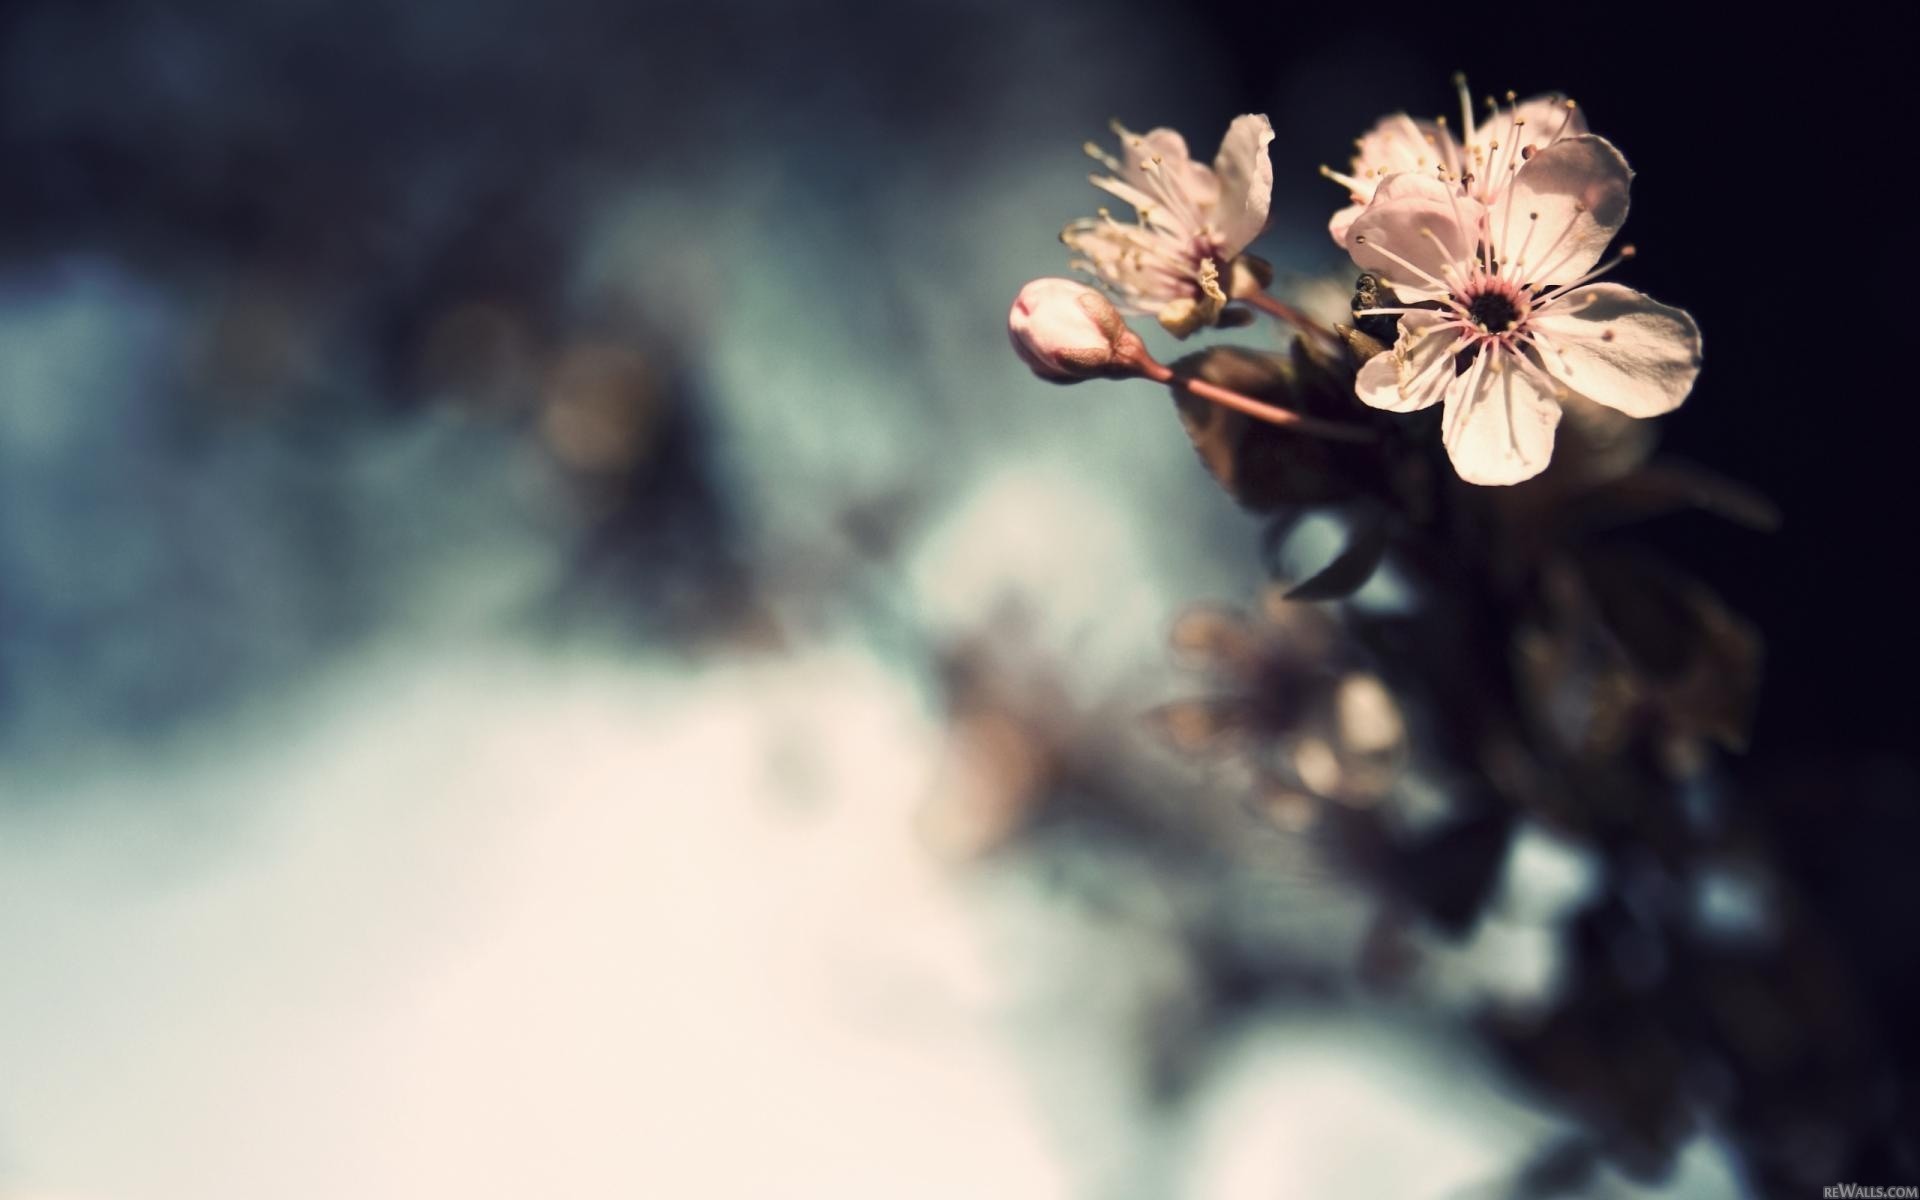 General 1920x1200 plants blurred outdoors petals bokeh watermarked closeup blurry background